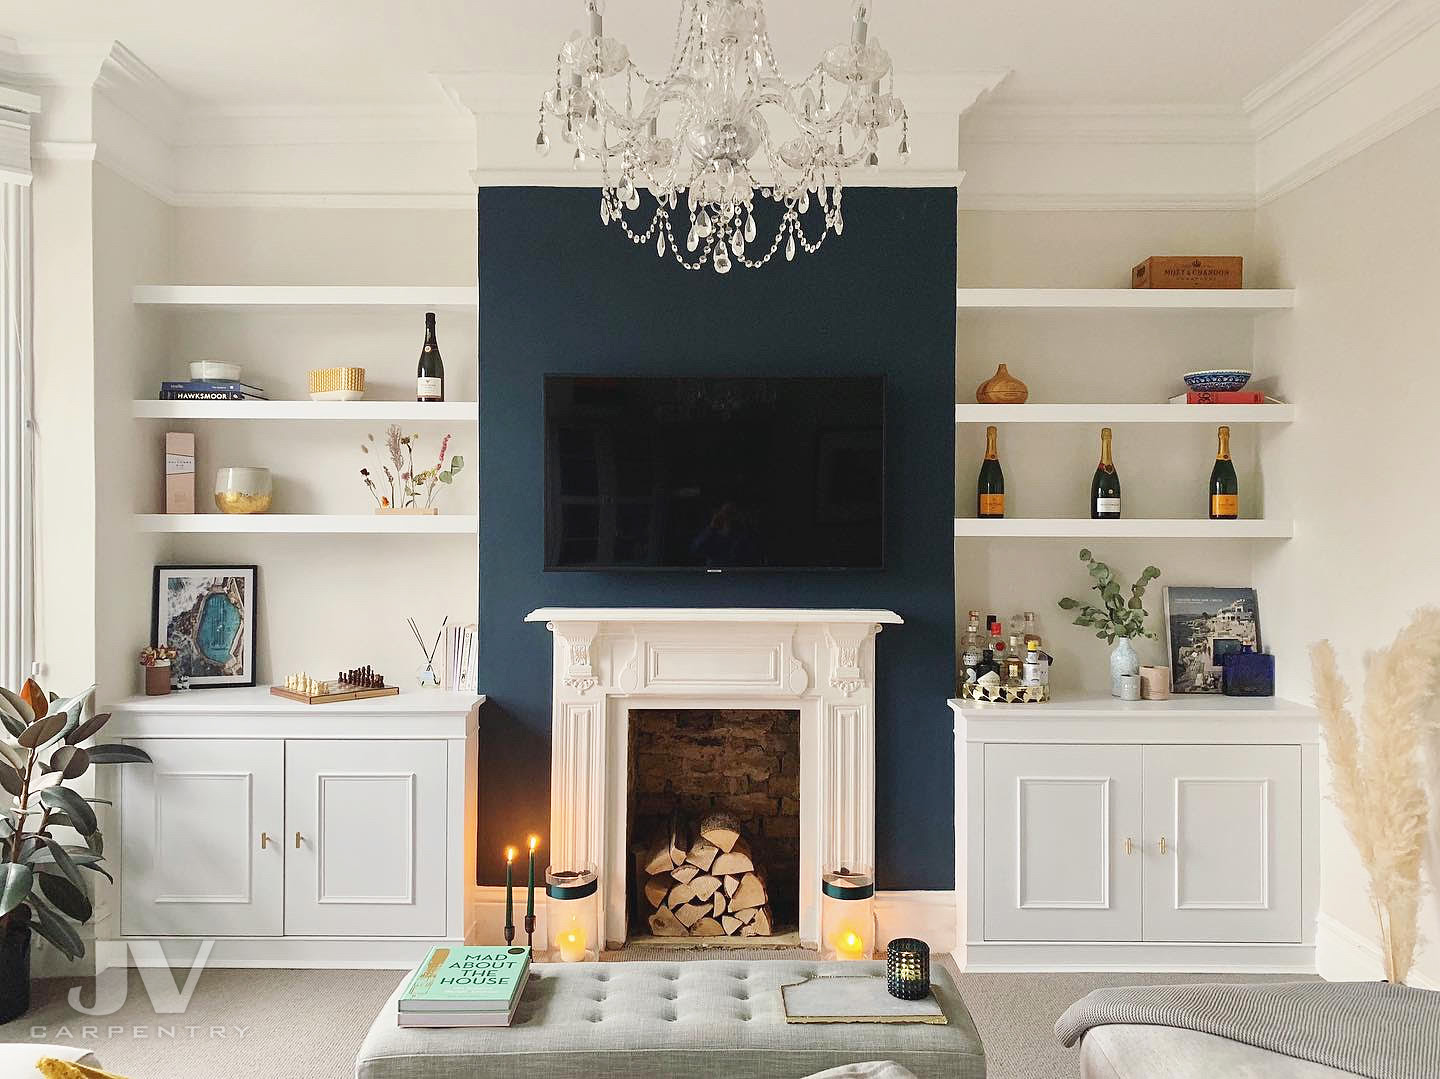 23 Alcove Shelving Ideas For Your, Floating Bookshelves Next To Fireplace